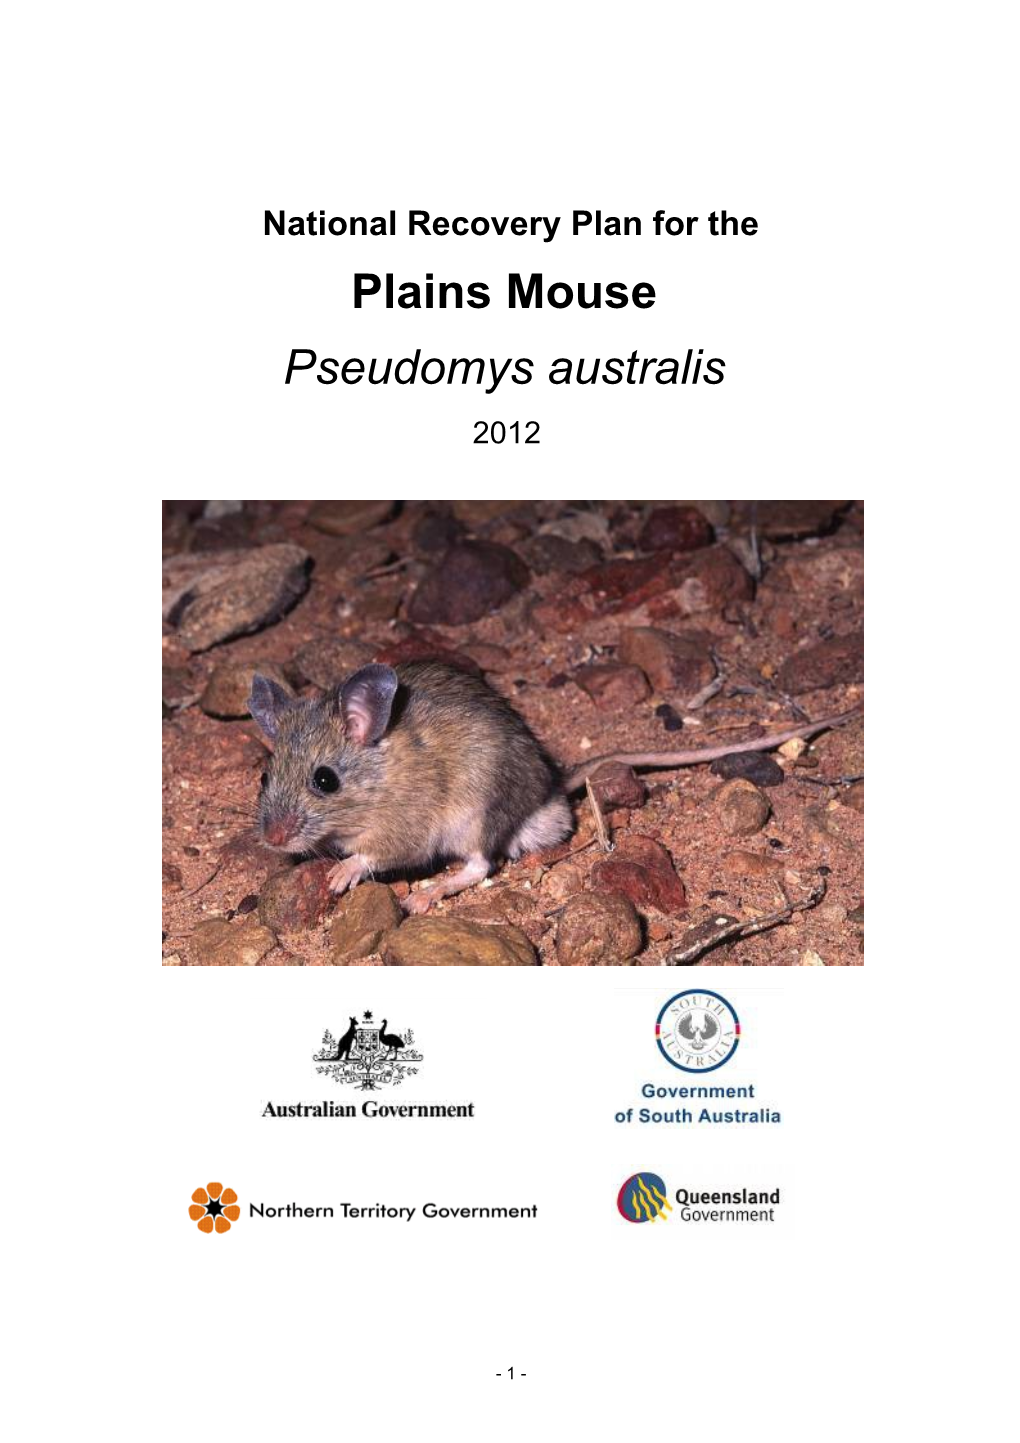 National Recovery Plan for the Plains Mouse Pseudomys Australis